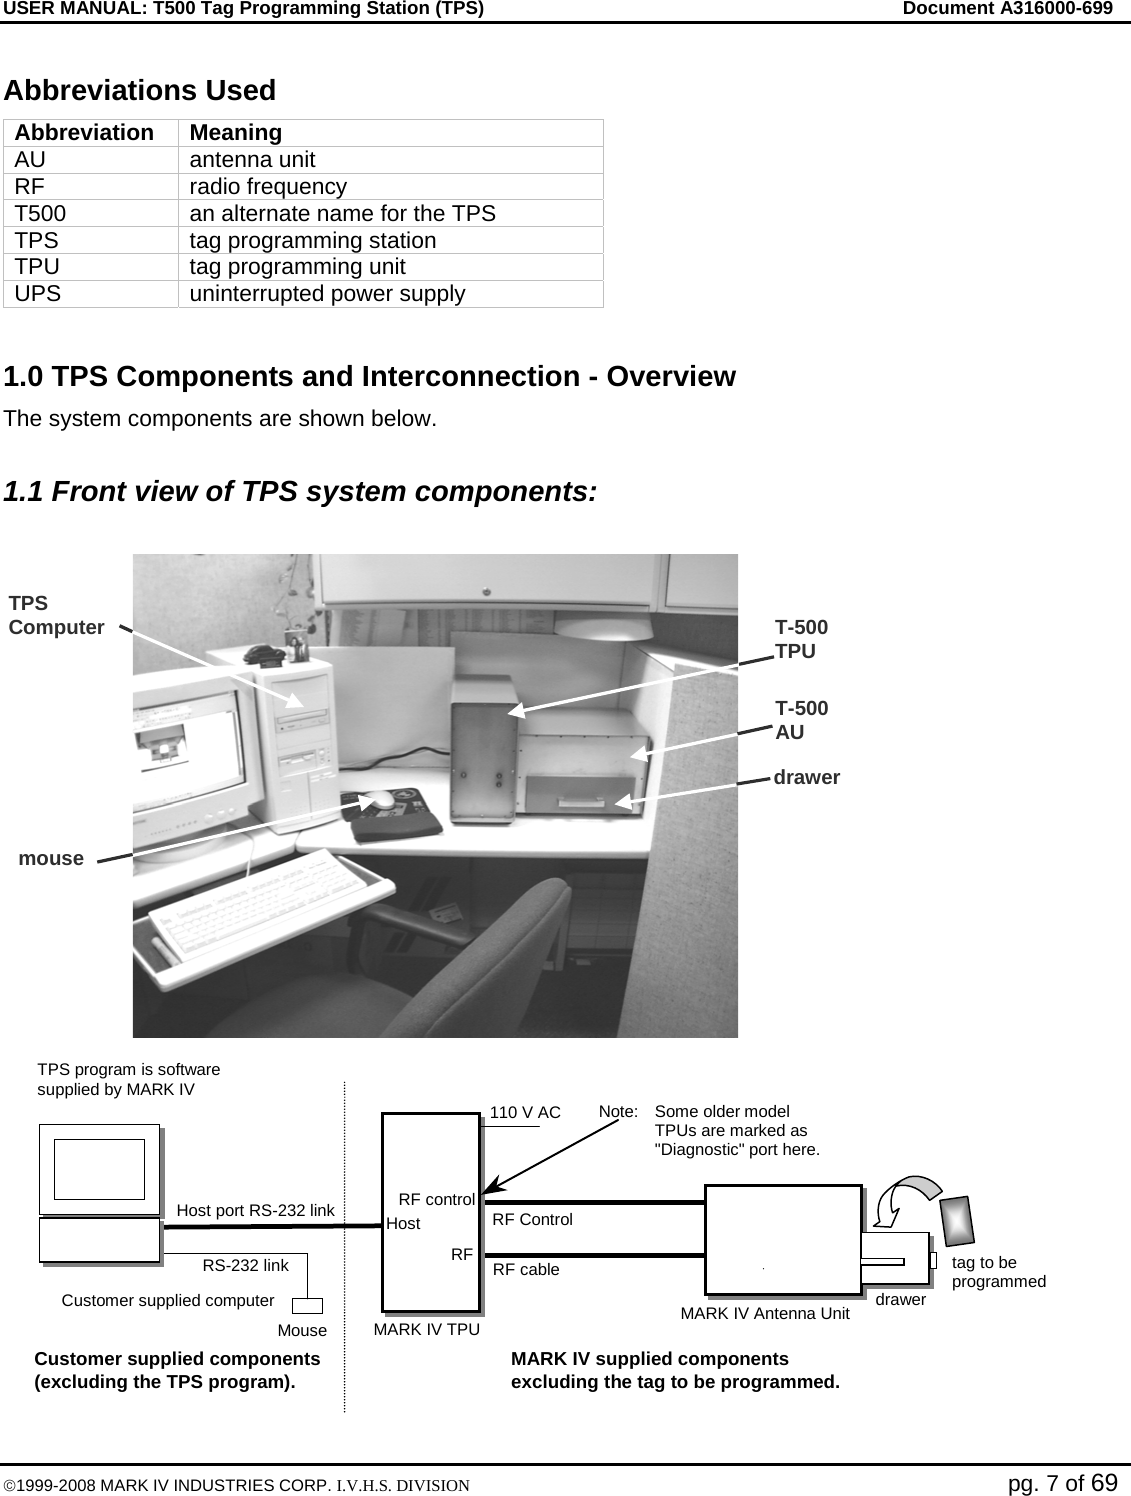 USER MANUAL: T500 Tag Programming Station (TPS)     Document A316000-699  ©1999-2008 MARK IV INDUSTRIES CORP. I.V.H.S. DIVISION   pg. 7 of 69 Abbreviations Used Abbreviation Meaning AU antenna unit RF radio frequency T500  an alternate name for the TPS TPS  tag programming station TPU  tag programming unit UPS  uninterrupted power supply  1.0 TPS Components and Interconnection - Overview The system components are shown below.  1.1 Front view of TPS system components:      T-500TPUT-500AUTPSComputermousedrawerMARK IV Antenna Unit110 V ACMARK IV TPURF cableHost port RS-232 linkCustomer supplied computerCustomer supplied components(excluding the TPS program). MARK IV supplied componentsexcluding the tag to be programmed.MouseRS-232 linkNote: Some older modelTPUs are marked as&quot;Diagnostic&quot; port here.HostRF controlTPS program is softwaresupplied by MARK IVdrawertag to beprogrammedRFRF Control